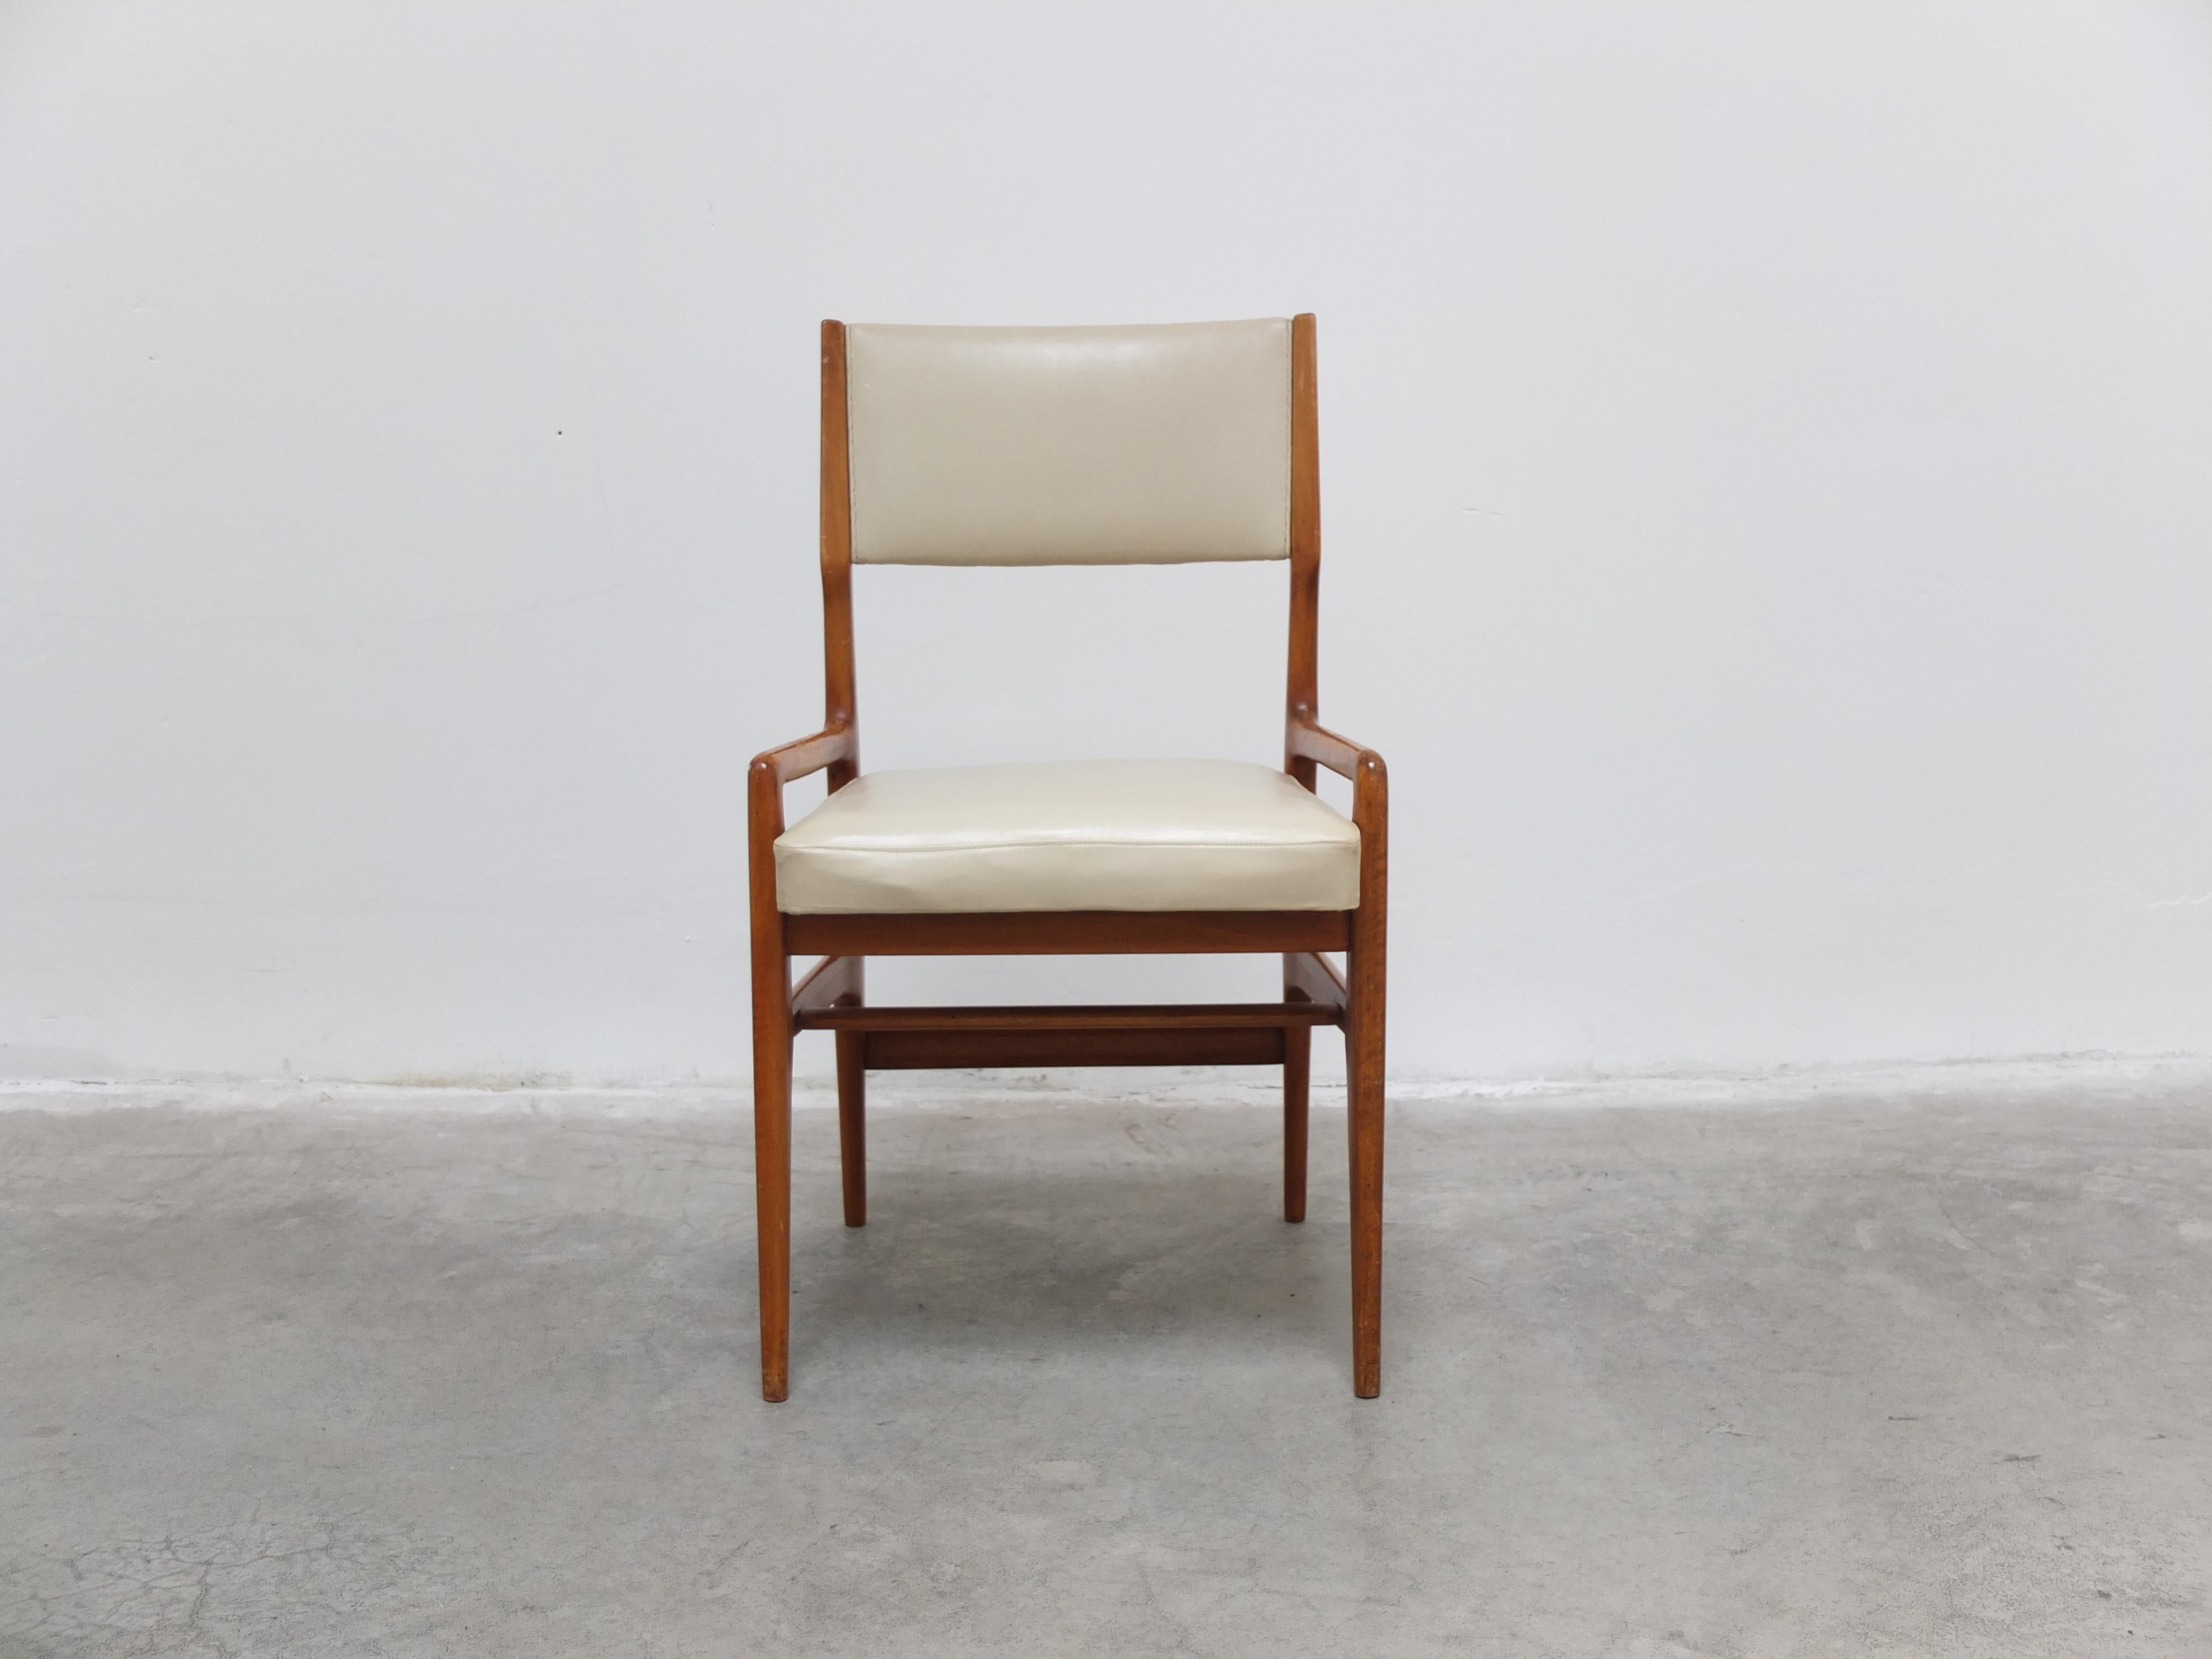 Very rare and beautiful model ‘676’ dining or side chair designed by Gio Ponti around 1953. The architectural frame is made of walnut and it has the original cream-colored leather upholstery. Produced by Cassina during the 1950s. Exceptional